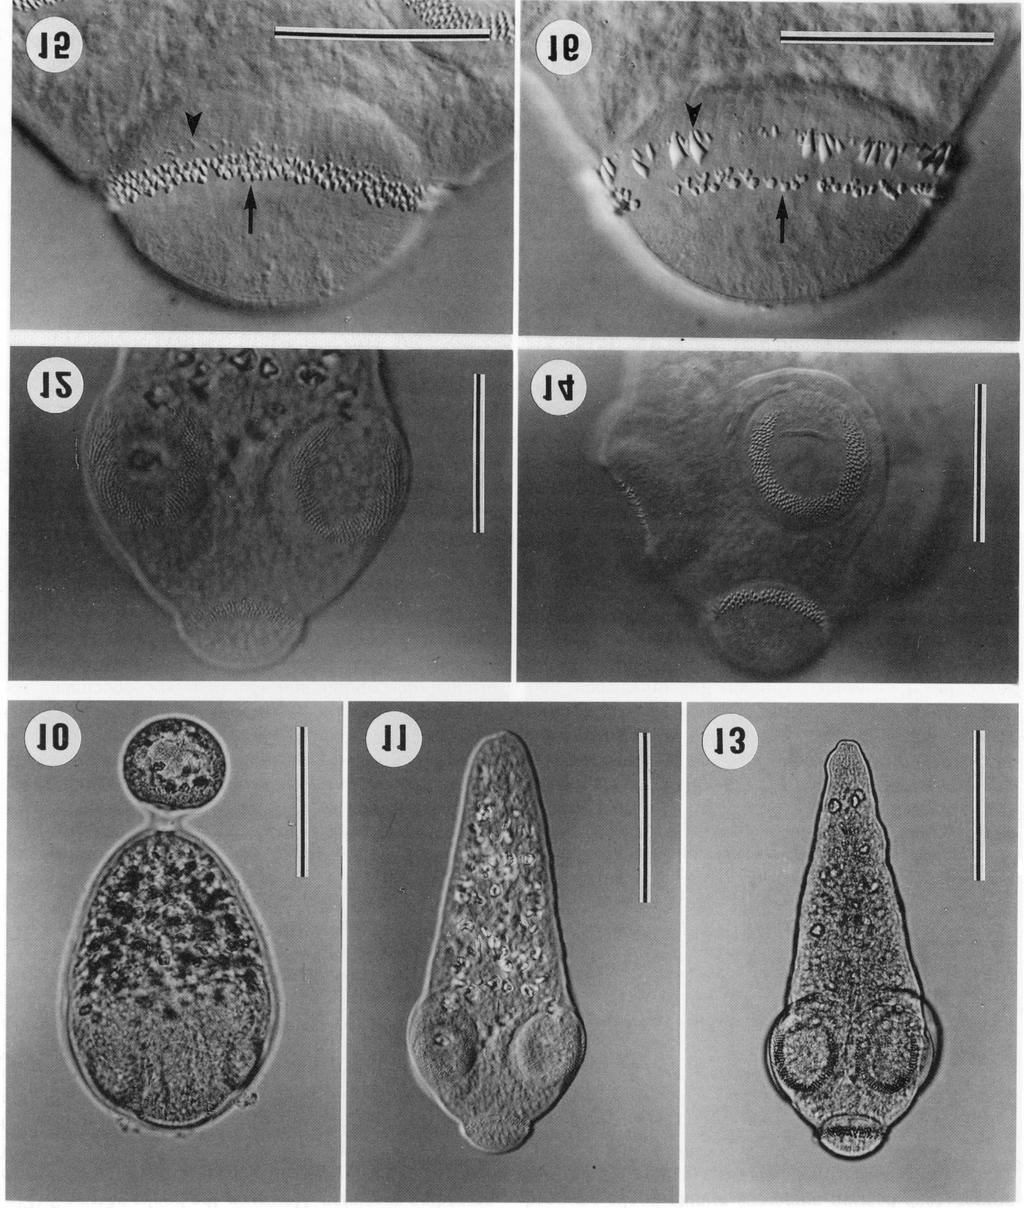 Figs. 10-16. Gangesia parasiluri. Fig. 10. Procercoid from experimentally infected Mesocyclops leuckarti, living, 9 days post infection at 20 C. Scale bar = 0.1 mm. Figs. 11, 12.